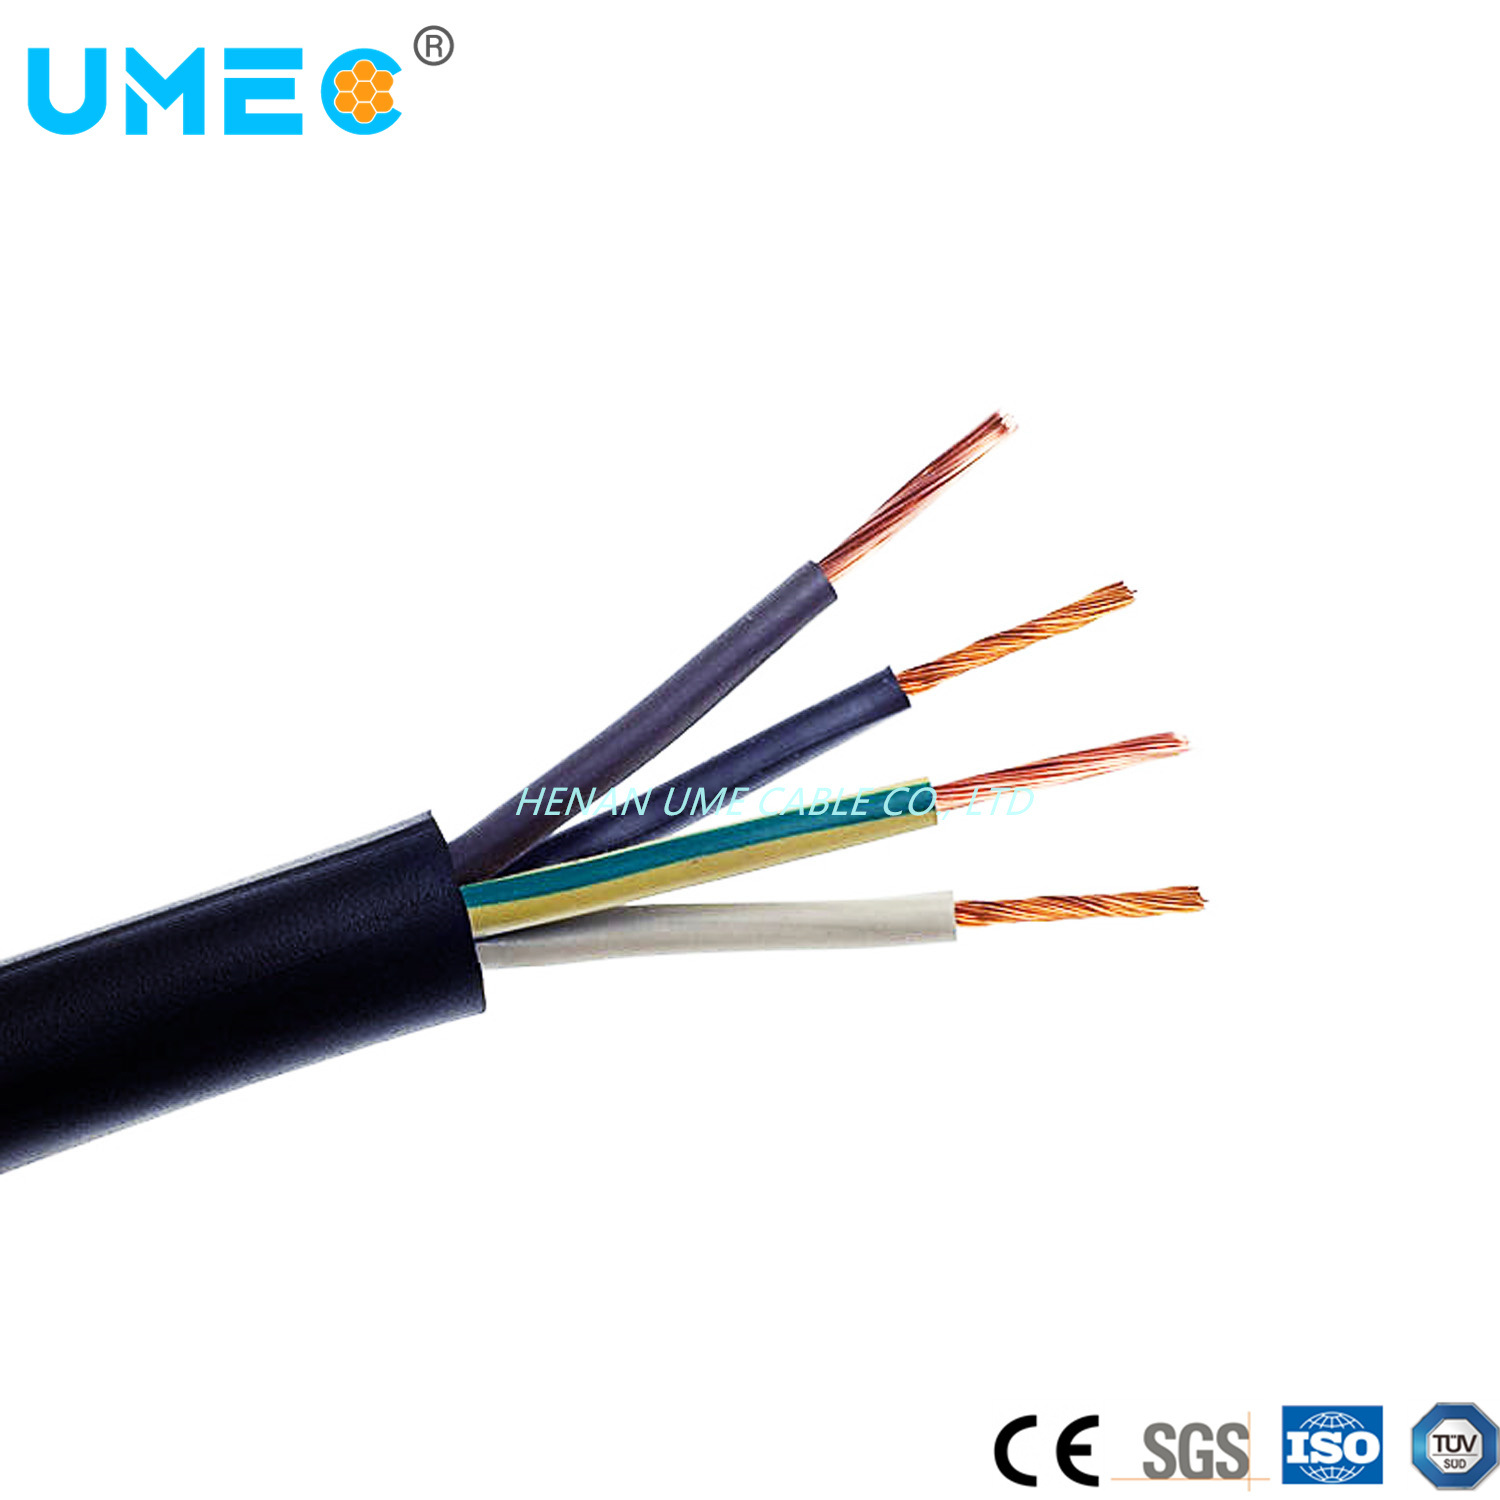 Harmonized PVC Insulated PVC Sheathed Electric Flexible Wire H03vvf H05vvf Wire